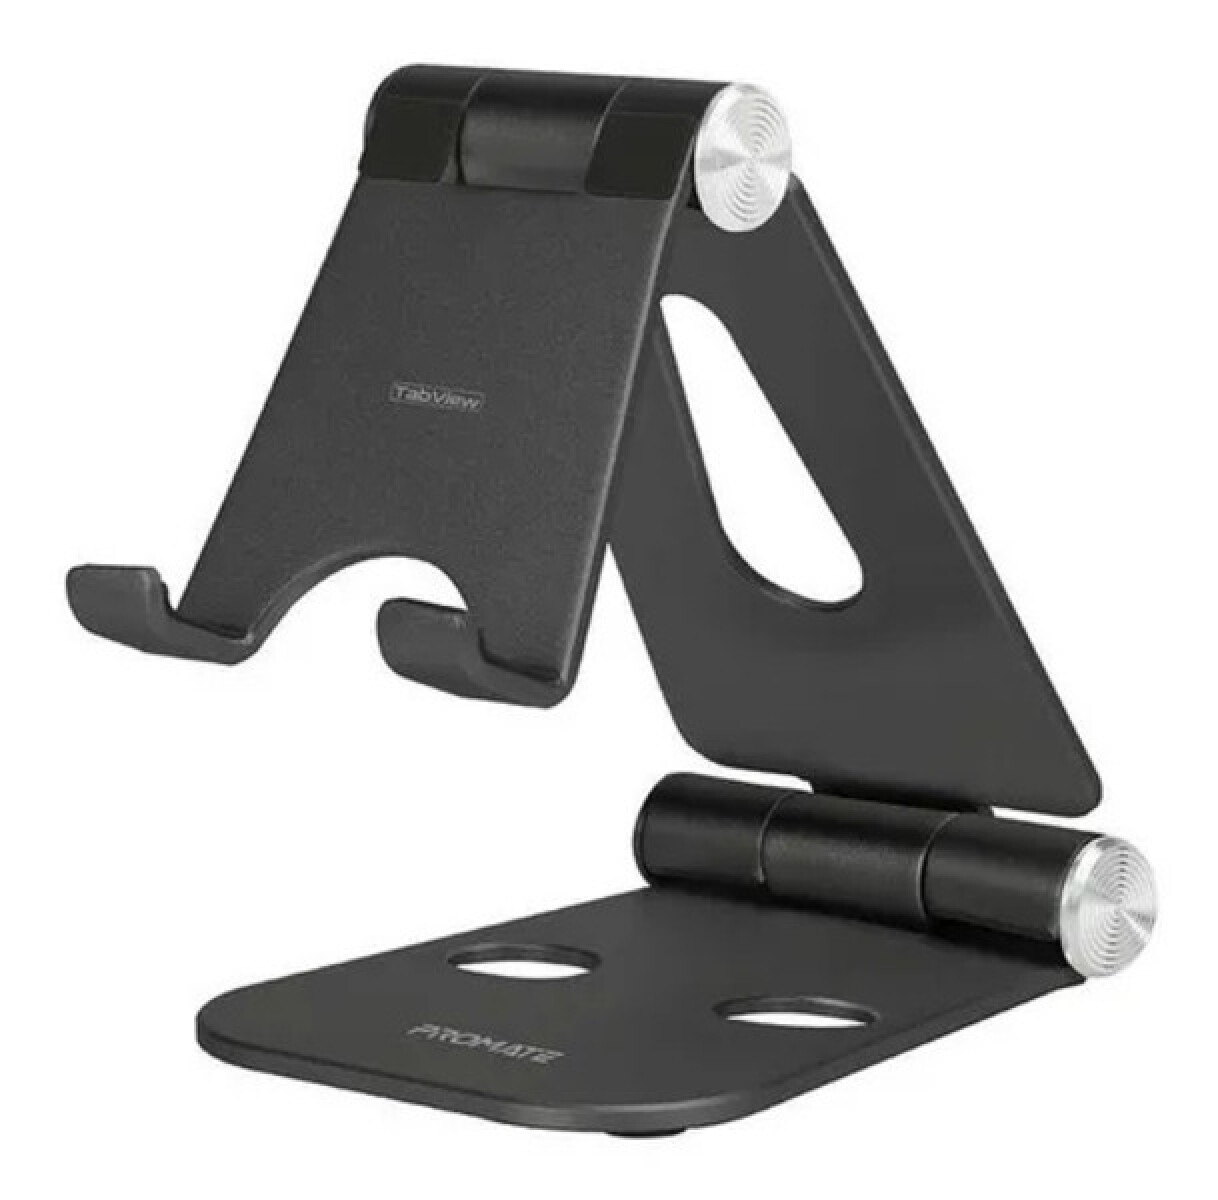 PROMATE TABVIEW STAND DE ALUMINIO PARA TABLET Y SAMRTPHONE - 4594 